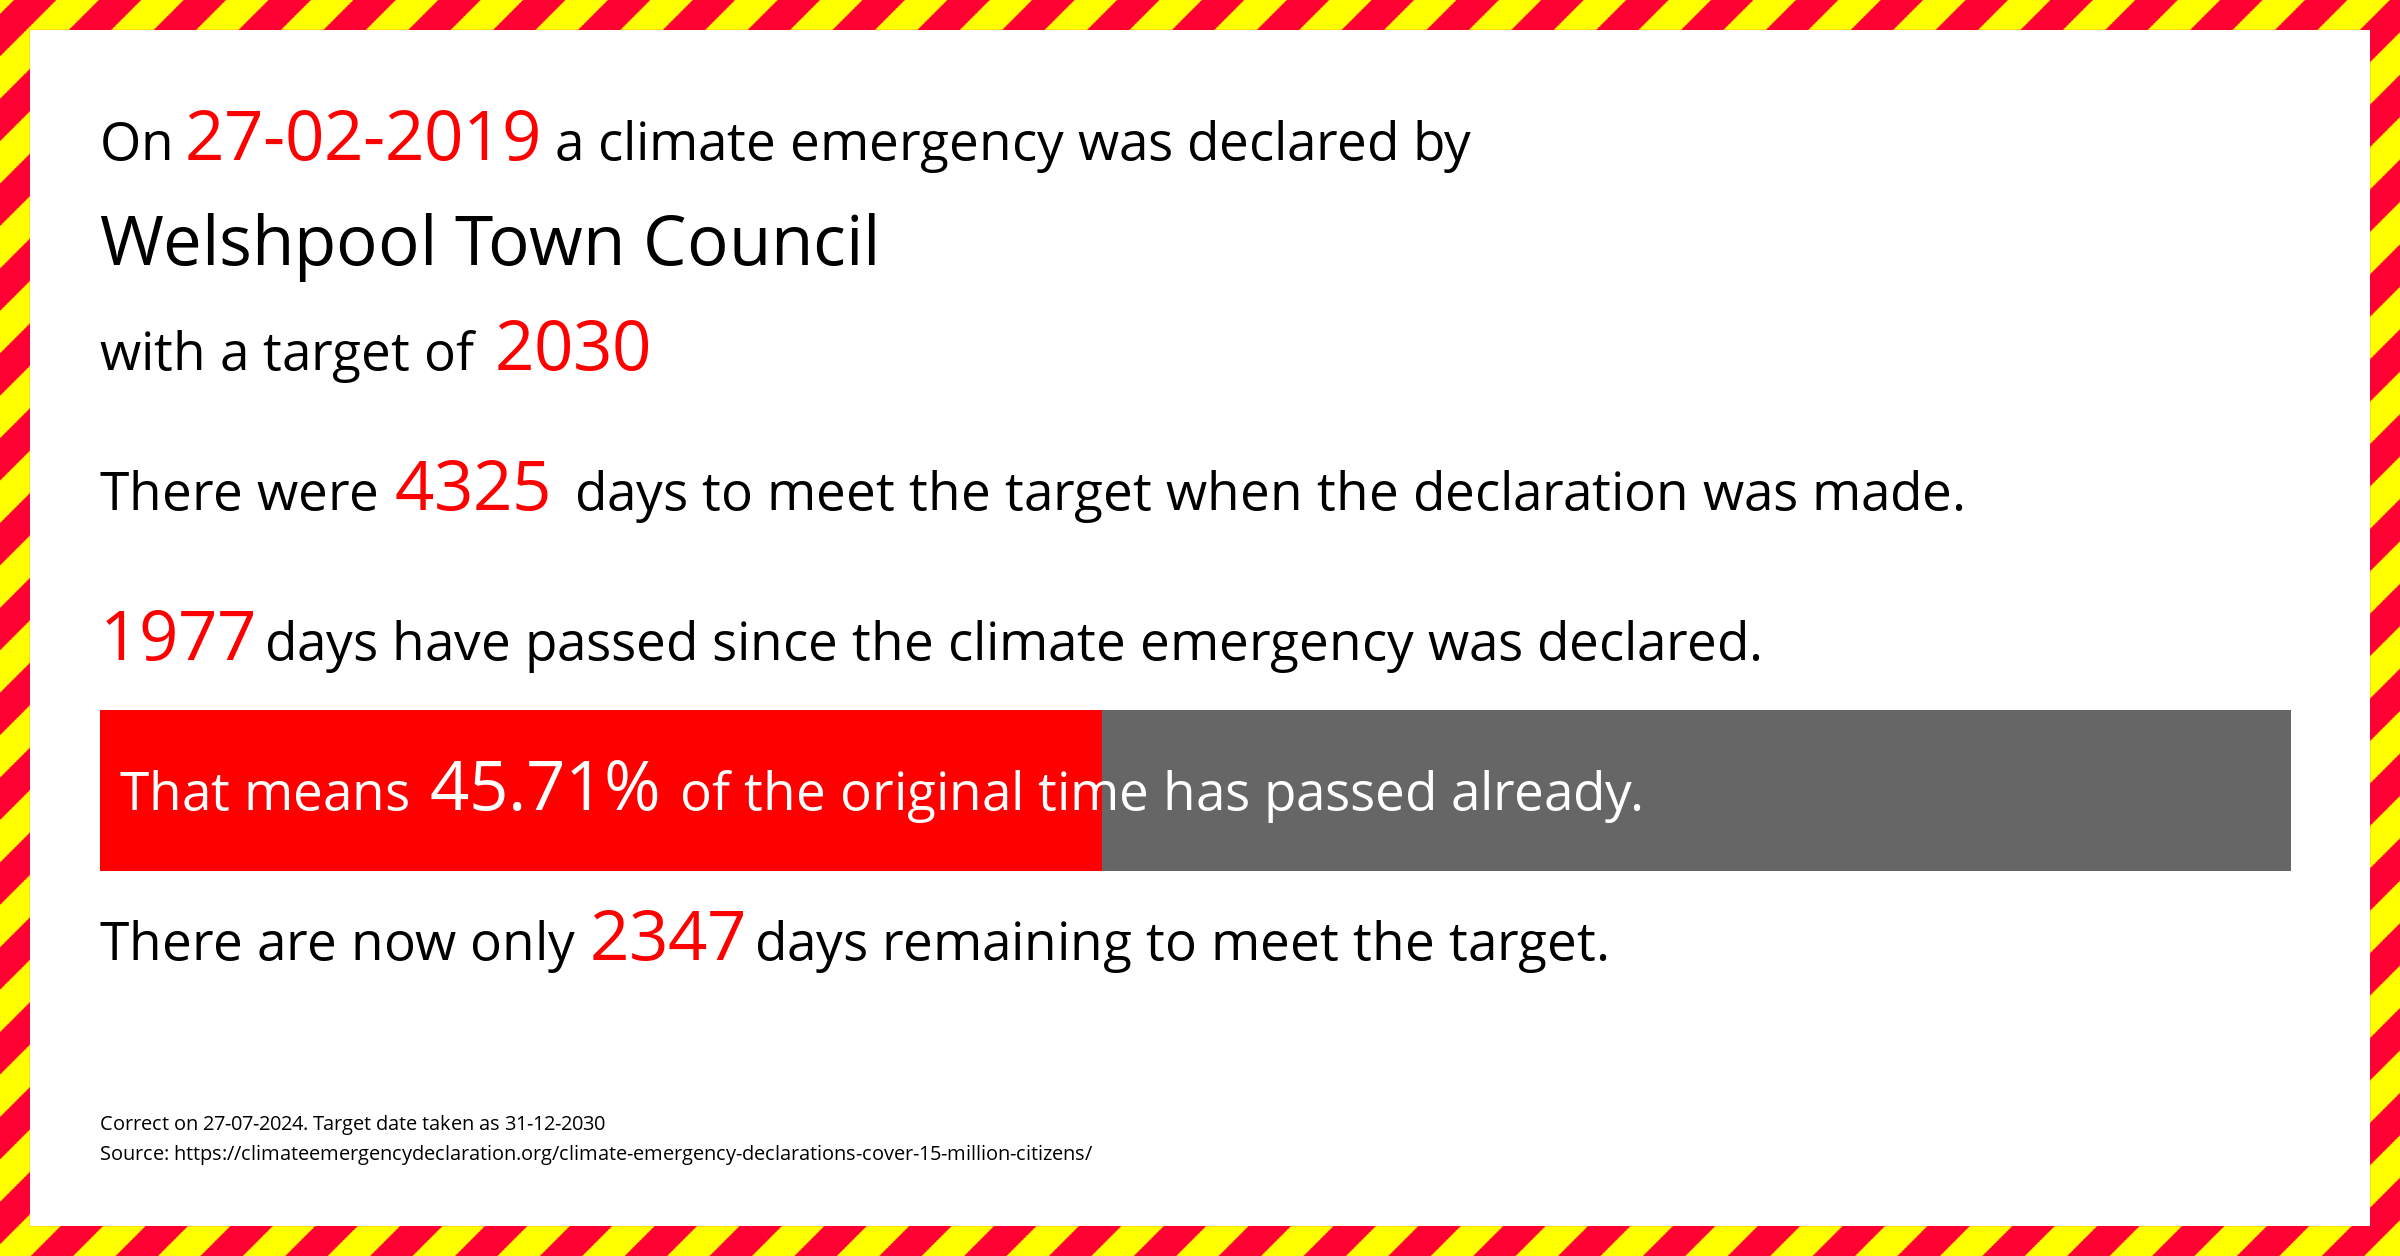 Welshpool Town Council declared a Climate emergency on Wednesday 27th February 2019, with a target of 2030.